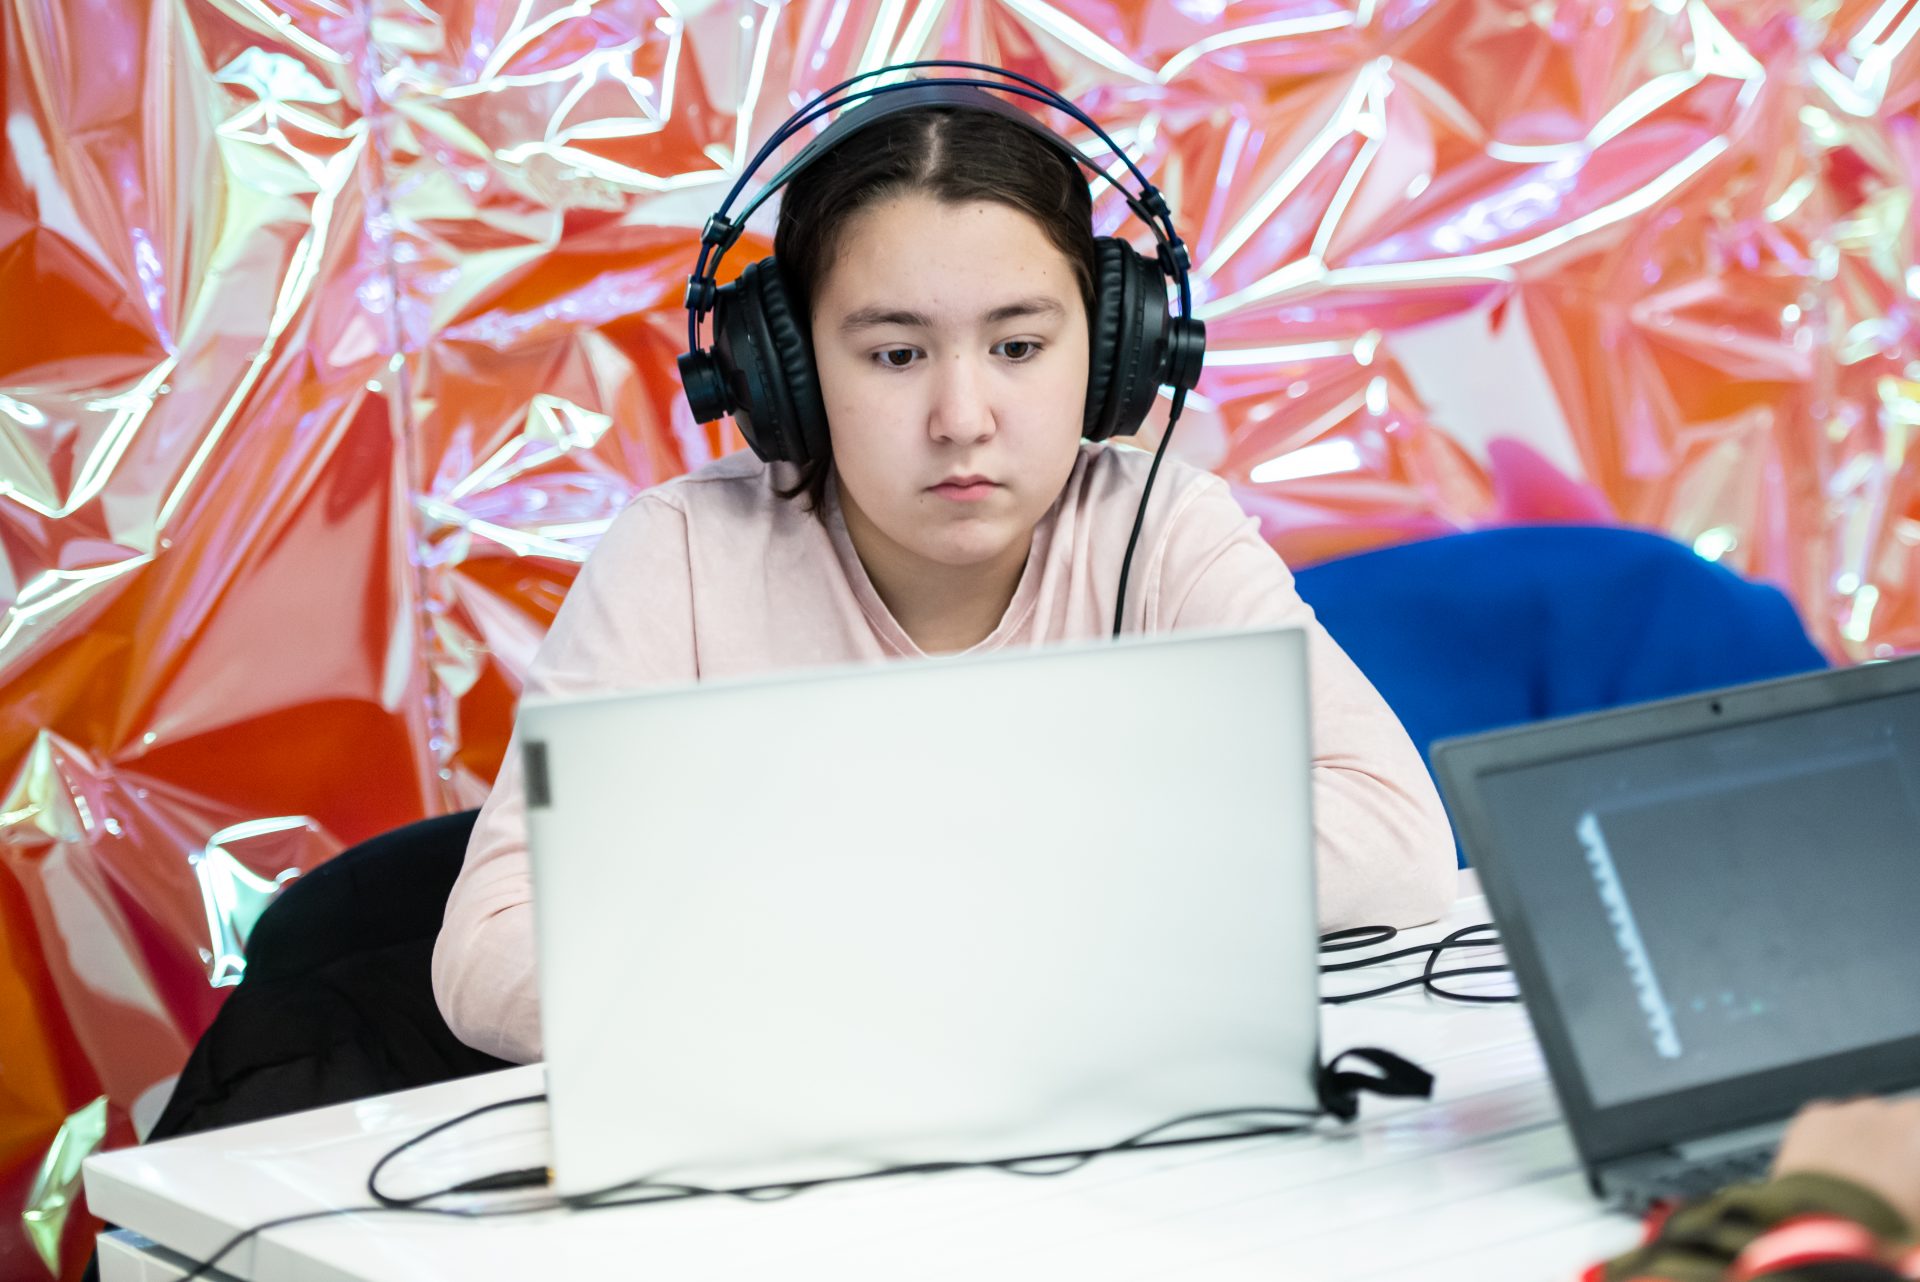 Image shows young person on computer with headphones.